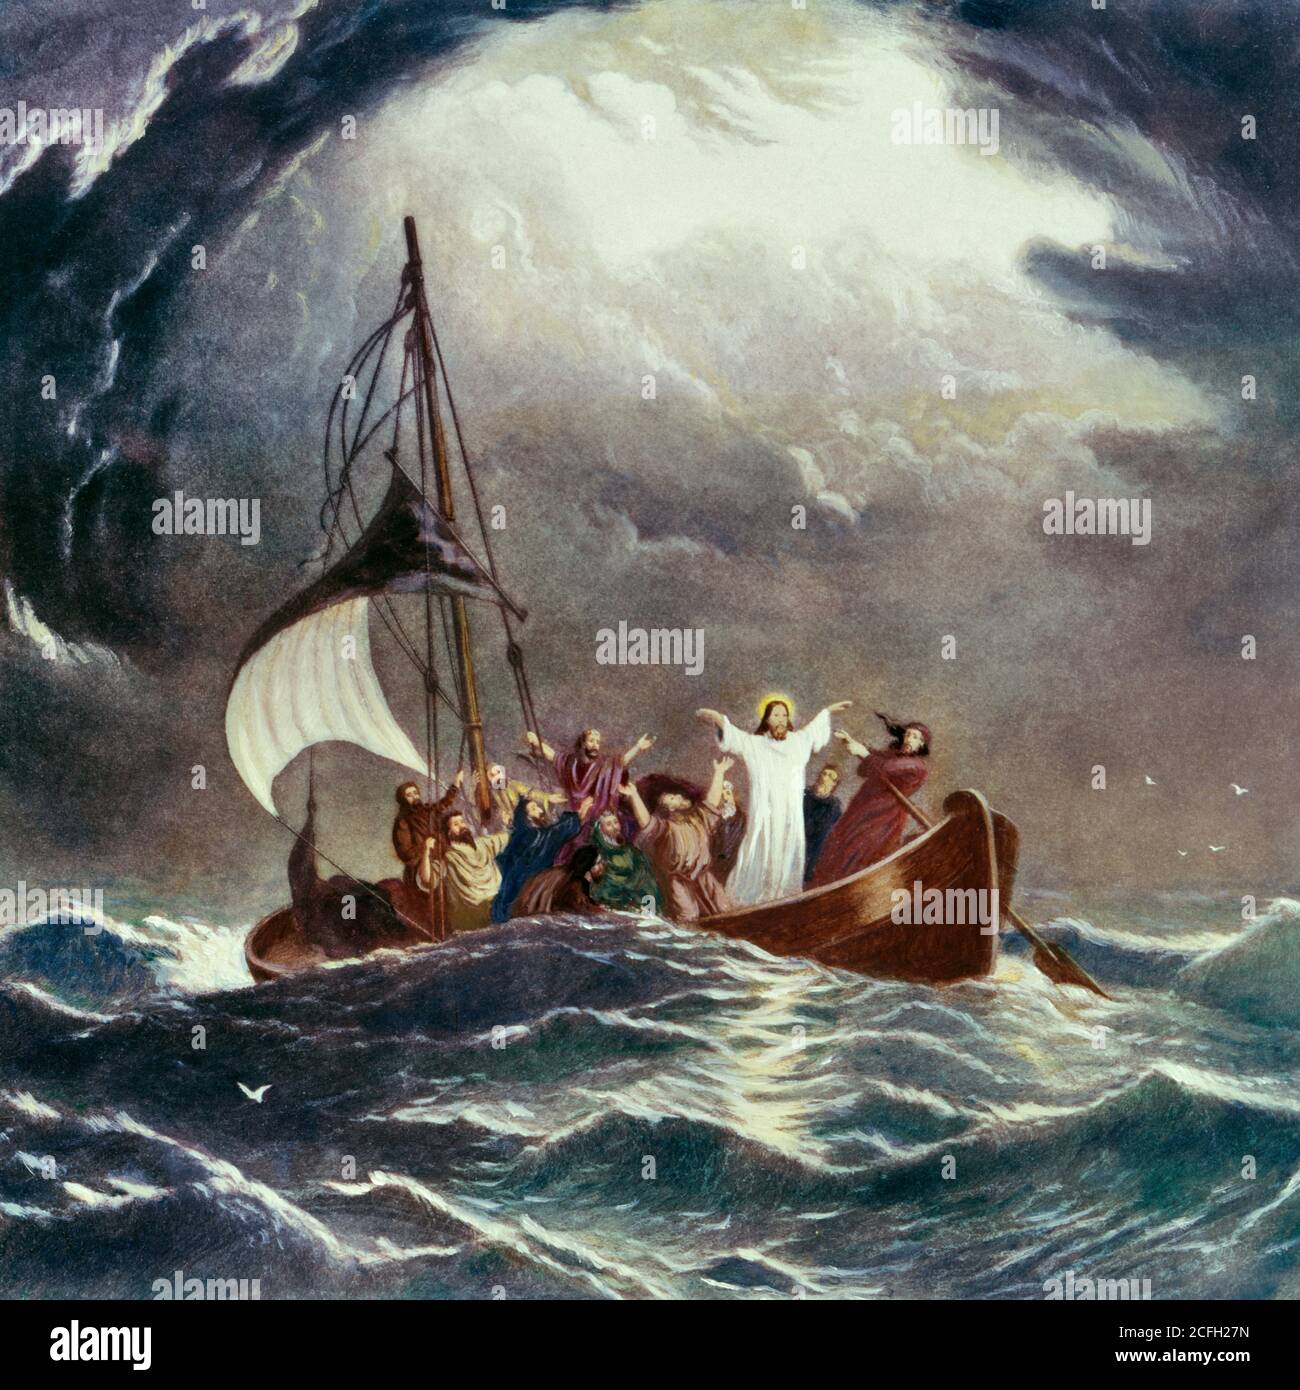 1860s RELIGIOUS IMAGE DEPICTING THE MIRACLE OF JESUS CHRIST CALMING STORM ON THE SEA OF GALILEE PAINTING BY JAMES HAMILTON 1867 - kr9414 SPL001 HARS MIRACLE SON OF GOD DISCIPLES FAITHFUL MIRACLES FAITH GALILEE MESSIAH PRECISION SPIRITUAL STILLING BELIEF BIBLICAL DEPICTING INSPIRATIONAL JESUS CHRIST OLD FASHIONED Stock Photo